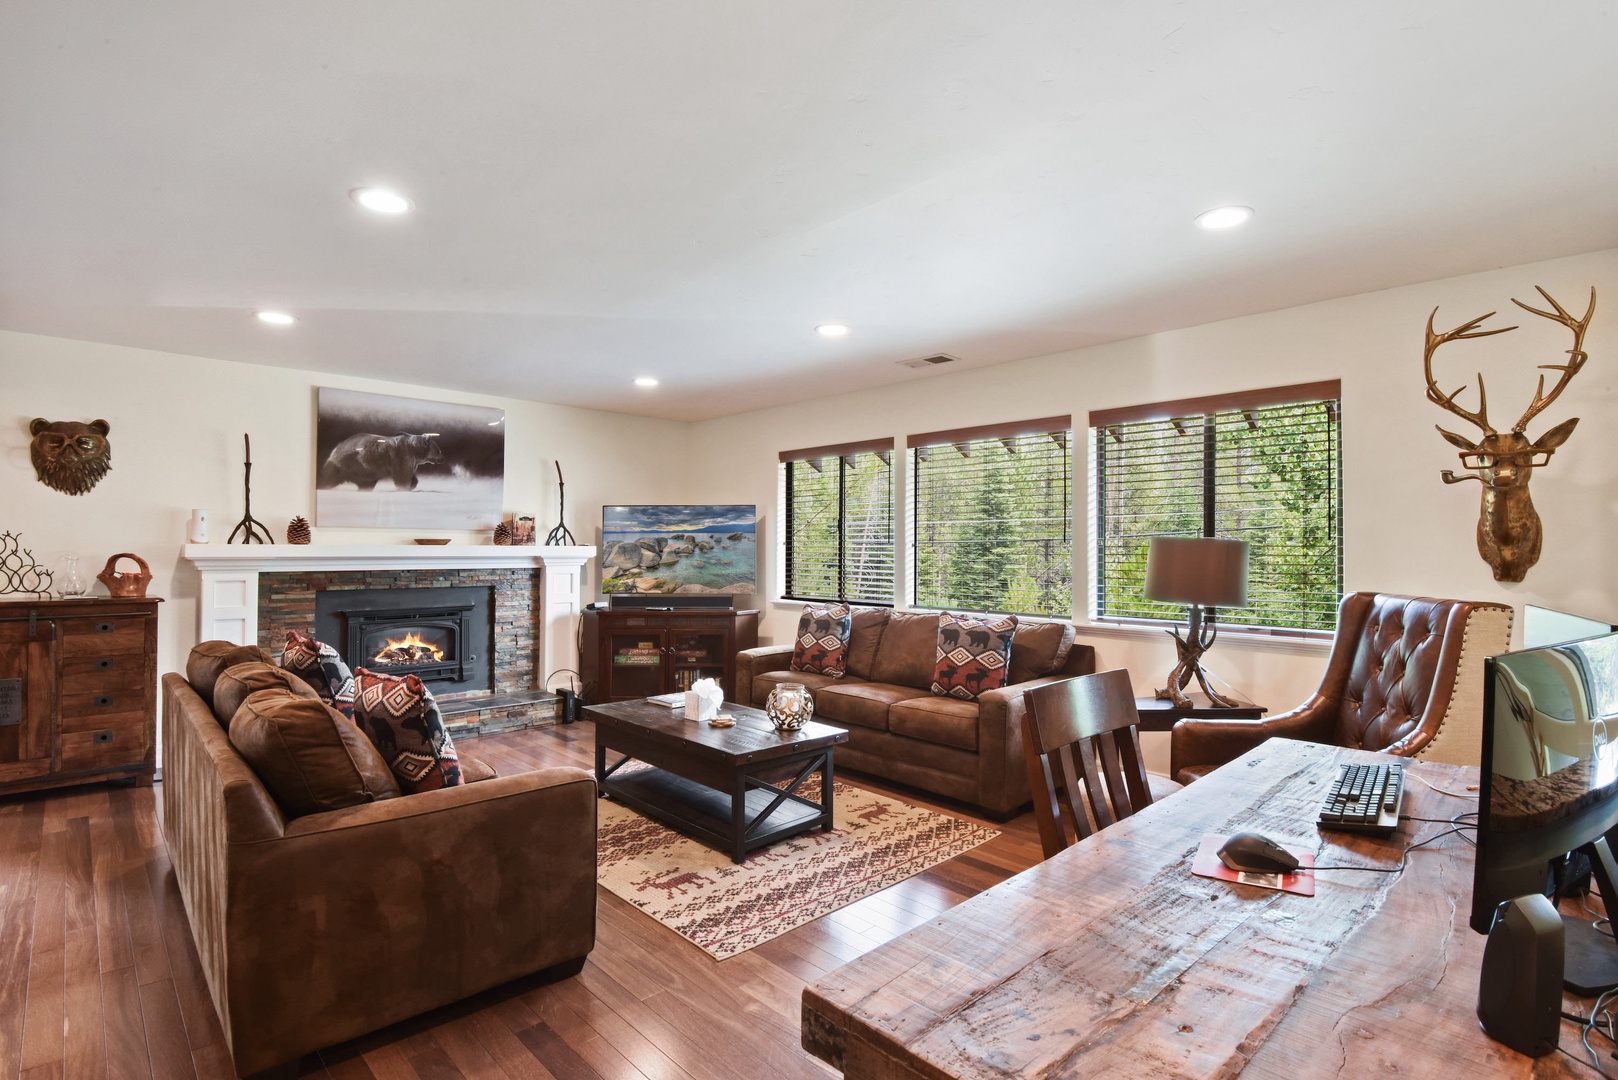 Living room with Smart TV, gas fireplace, and deck access